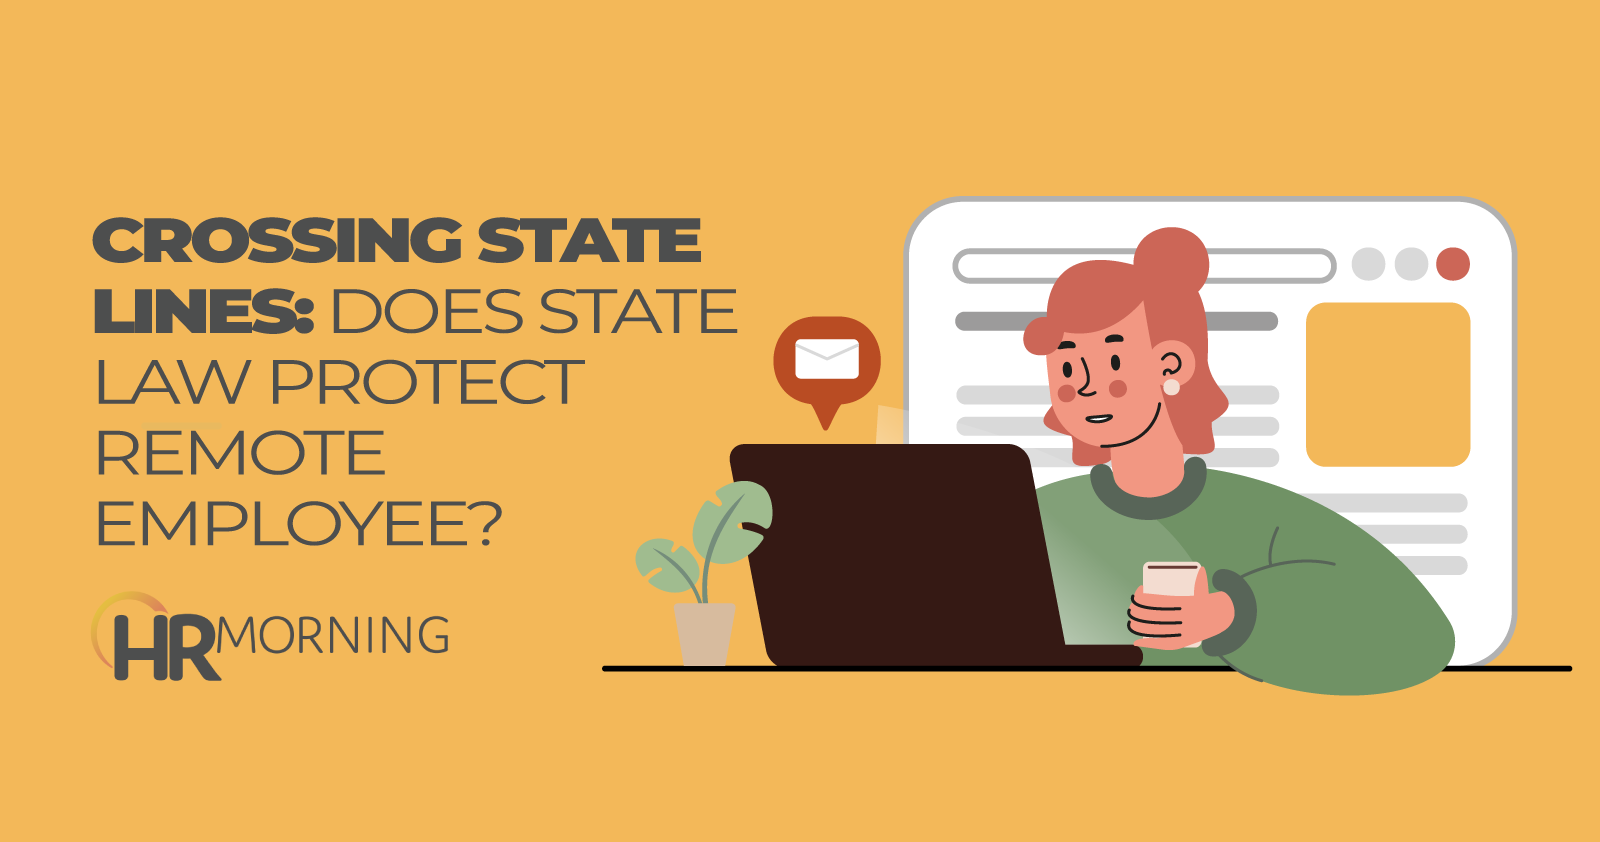 Crossing state lines: Does state law protect remote employee?